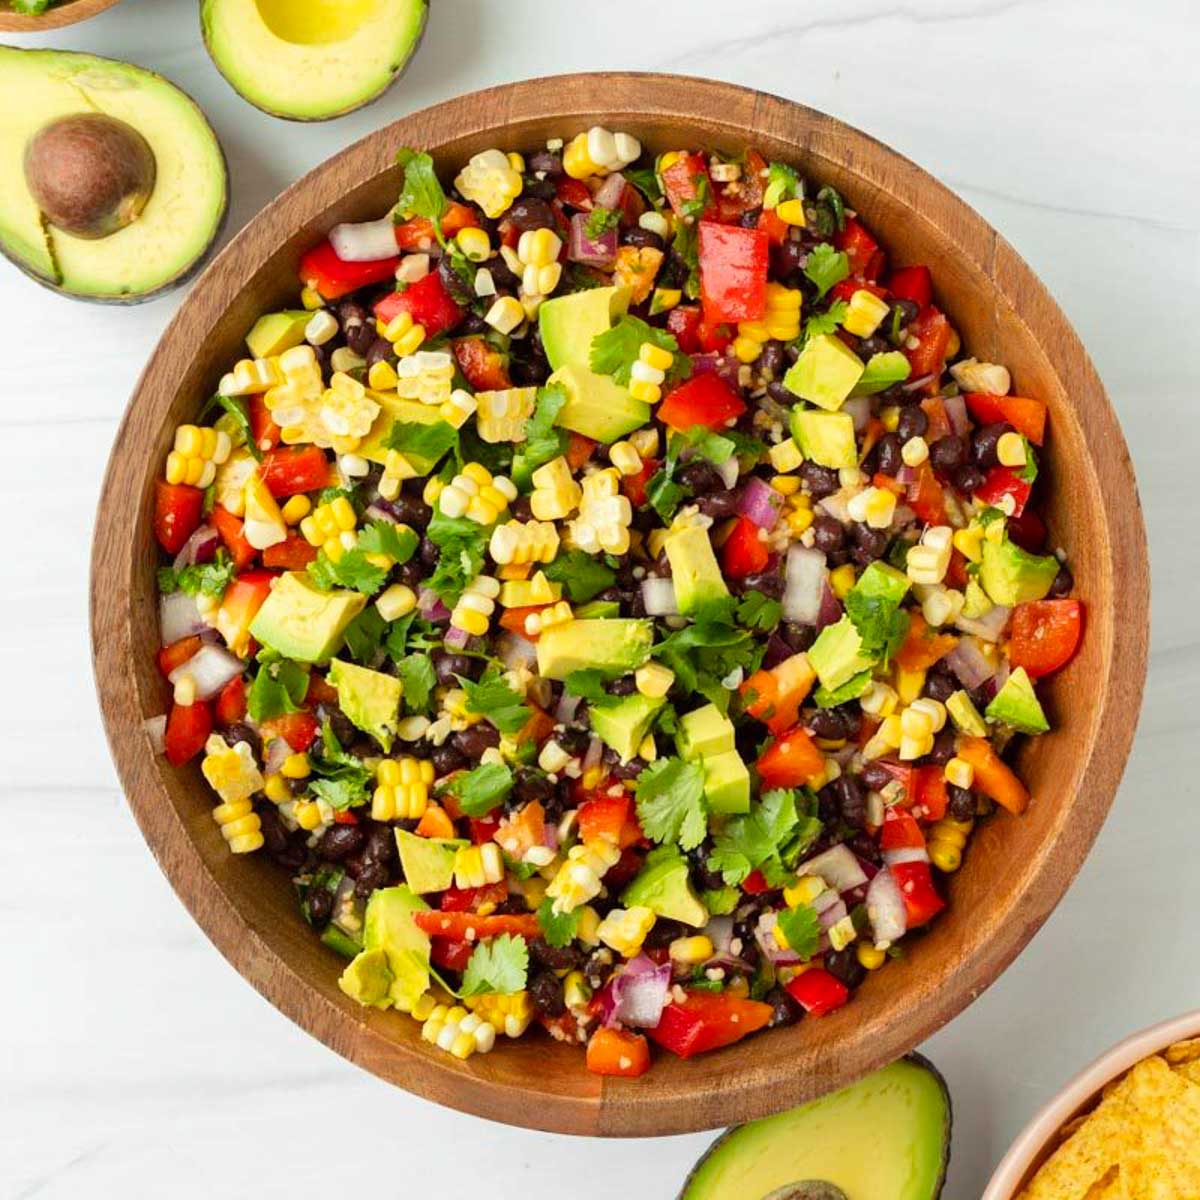 This cowboy caviar salsa is an easy gluten-free appetizer made with fresh vegetables and loaded with flavor. This homemade salsa is the perfect summer barbecue appetizer and a great Fourth of July appetizer.